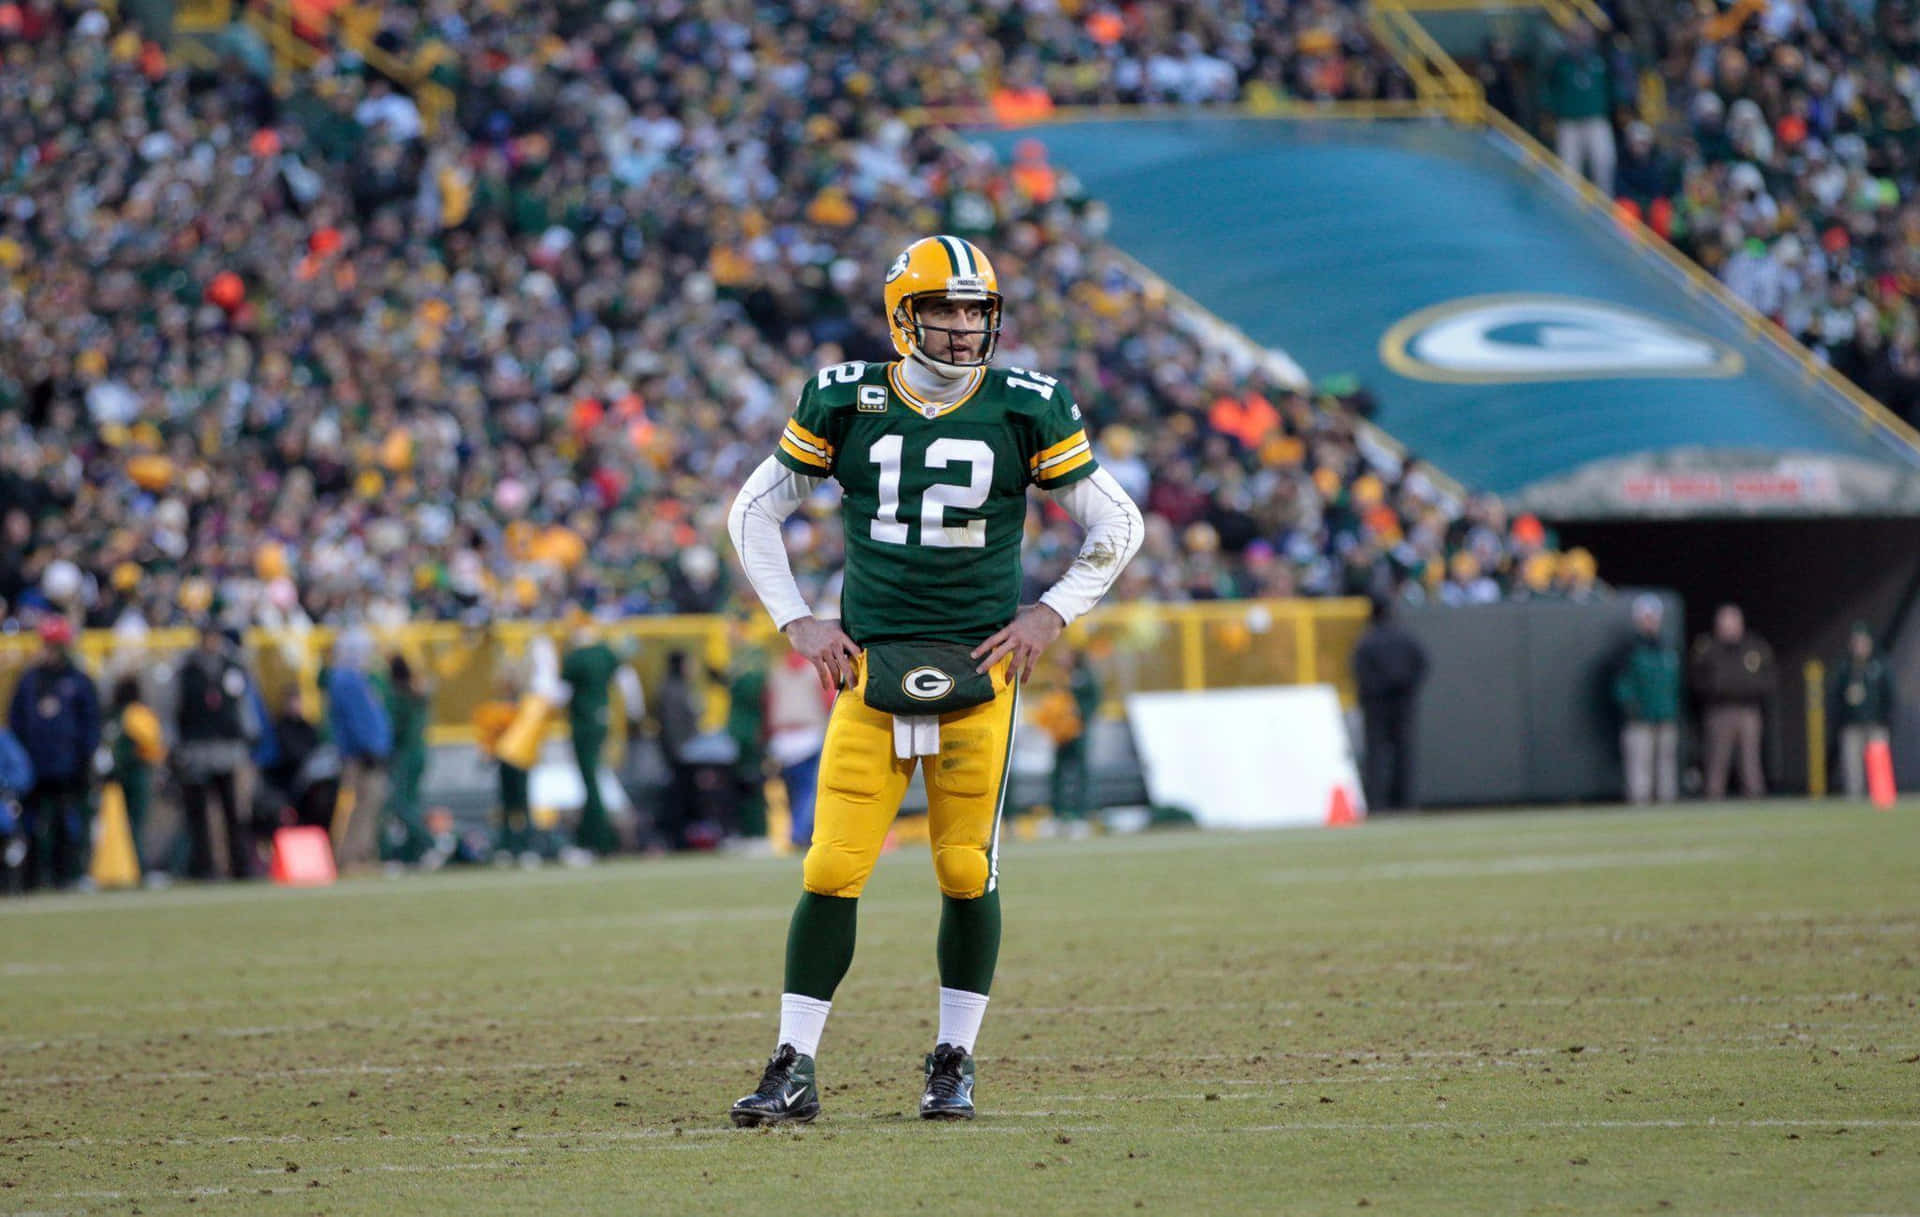 A side-profile of Aaron Rodgers, quarterback of the Green Bay Packers